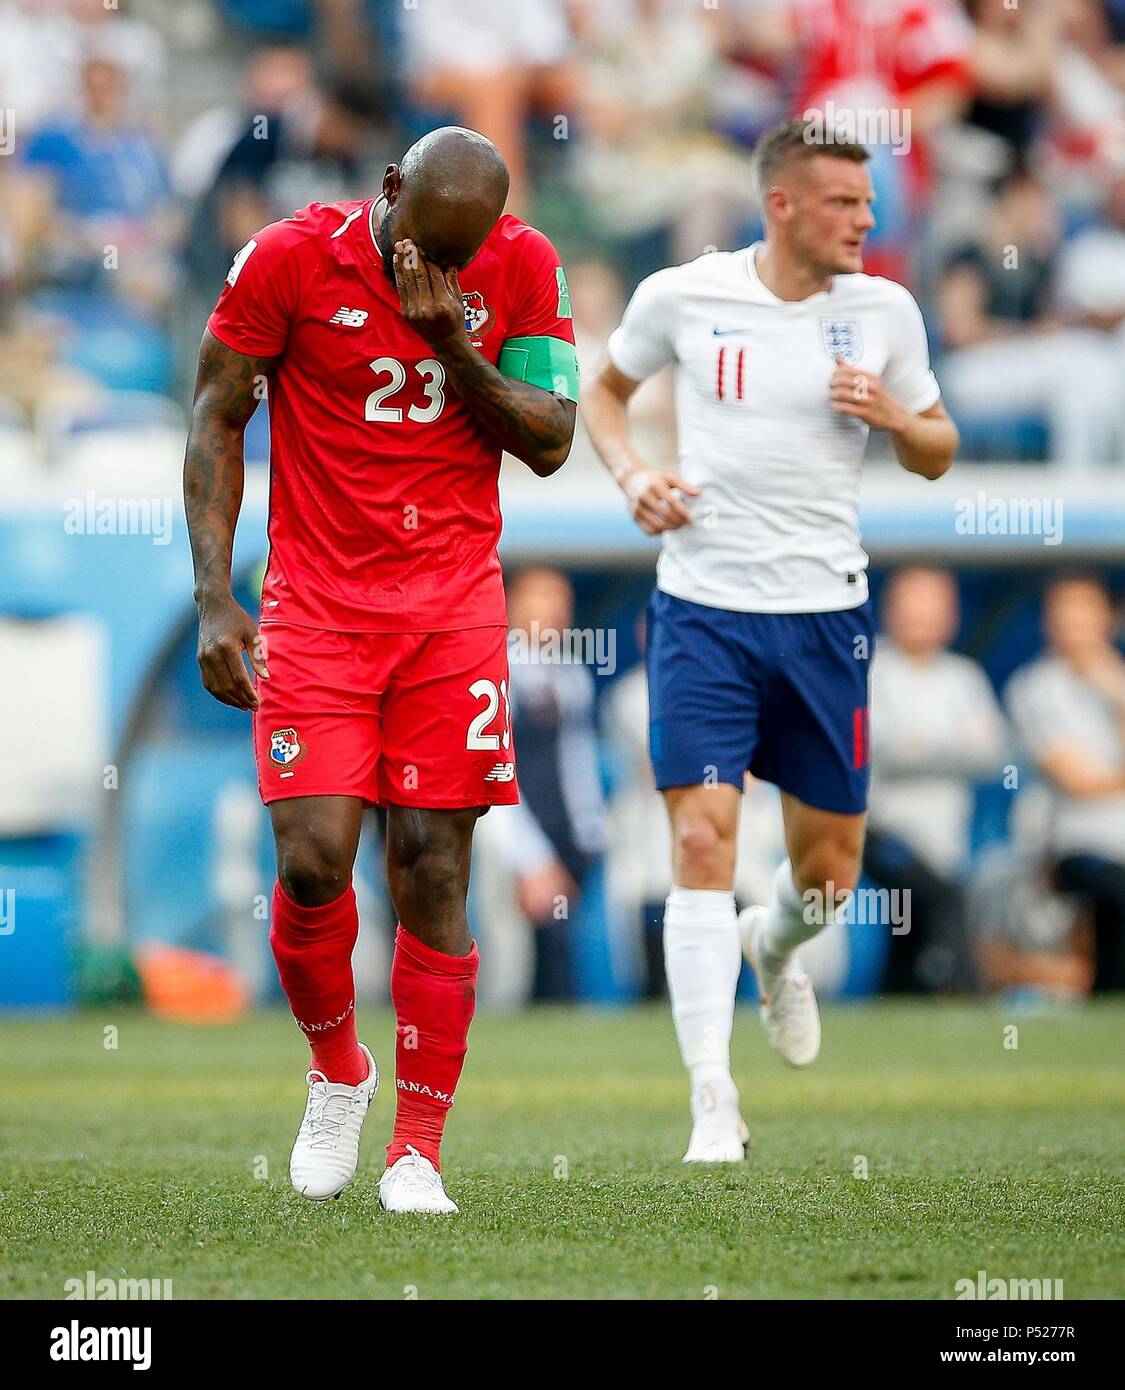 Nijni Novgorod, Russia. 24th June, 2018:ENGLAND VS. PANAMA - Felipe Baloy of Panama cries after scoring the first goal of Panama in the history of the World Cups during a match between England and Panama valid for the second round of group G of the 2018 World Cup, held at the Nizhny Novgorod stadium in the city of Nihzny Novgorod, Russia. (Photo: Marcelo Machado de Melo/Fotoarena) Credit: Foto Arena LTDA/Alamy Live News Stock Photo